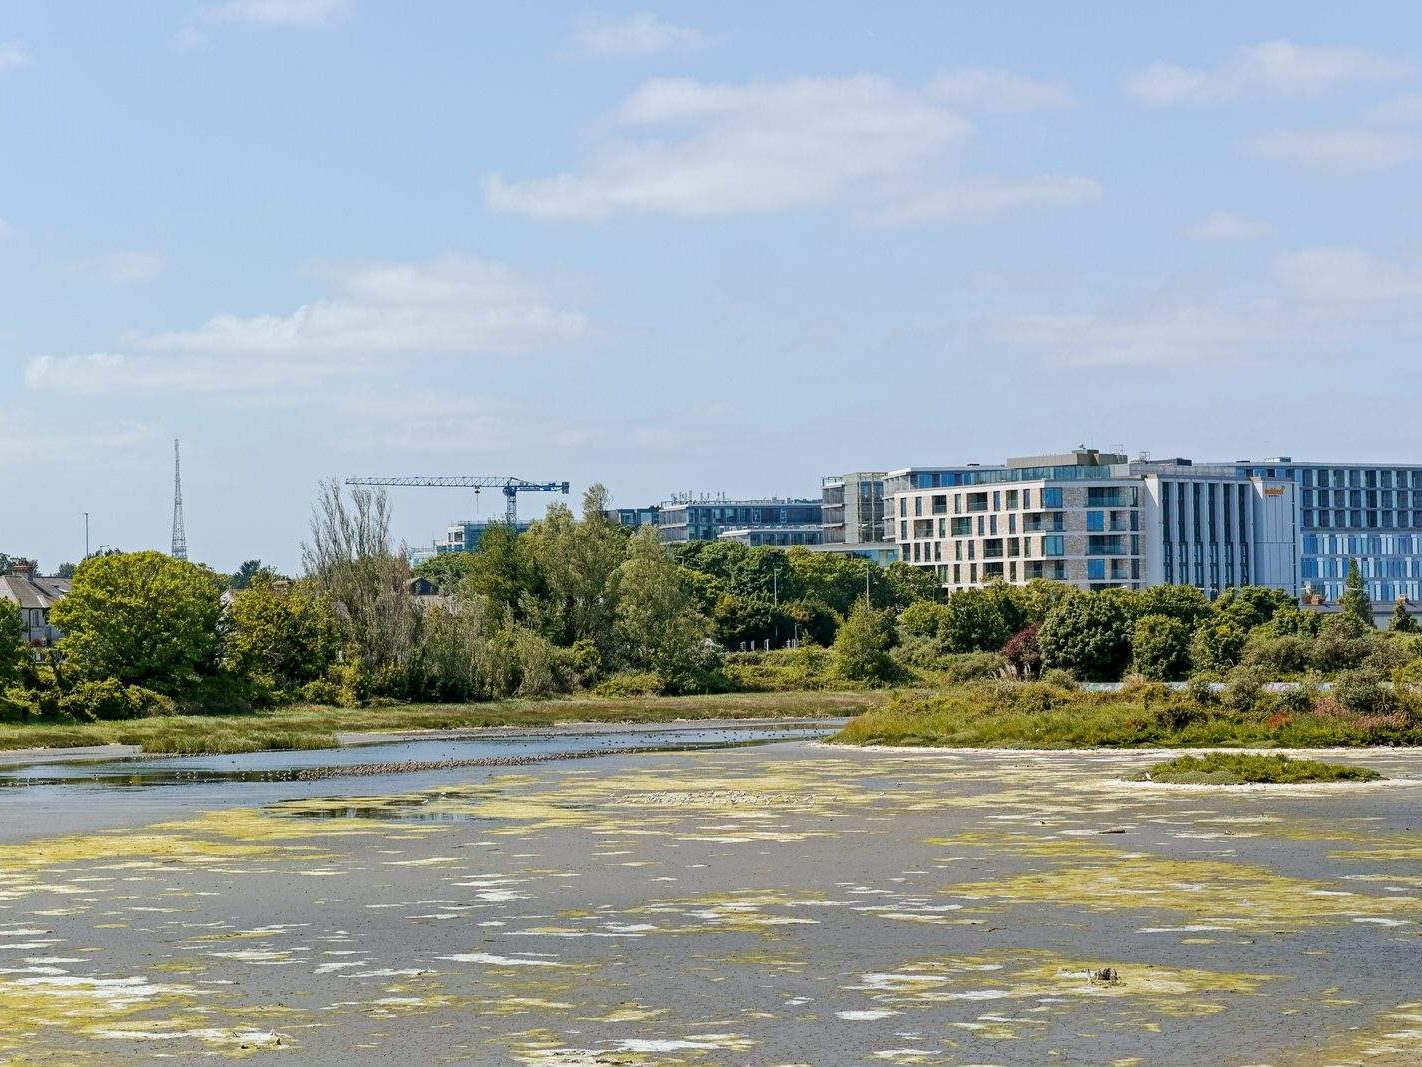 BOOTERSTOWN MARSH AND TRAIN STATION [I USED A SIGMA DP3 QUATTRO] 014